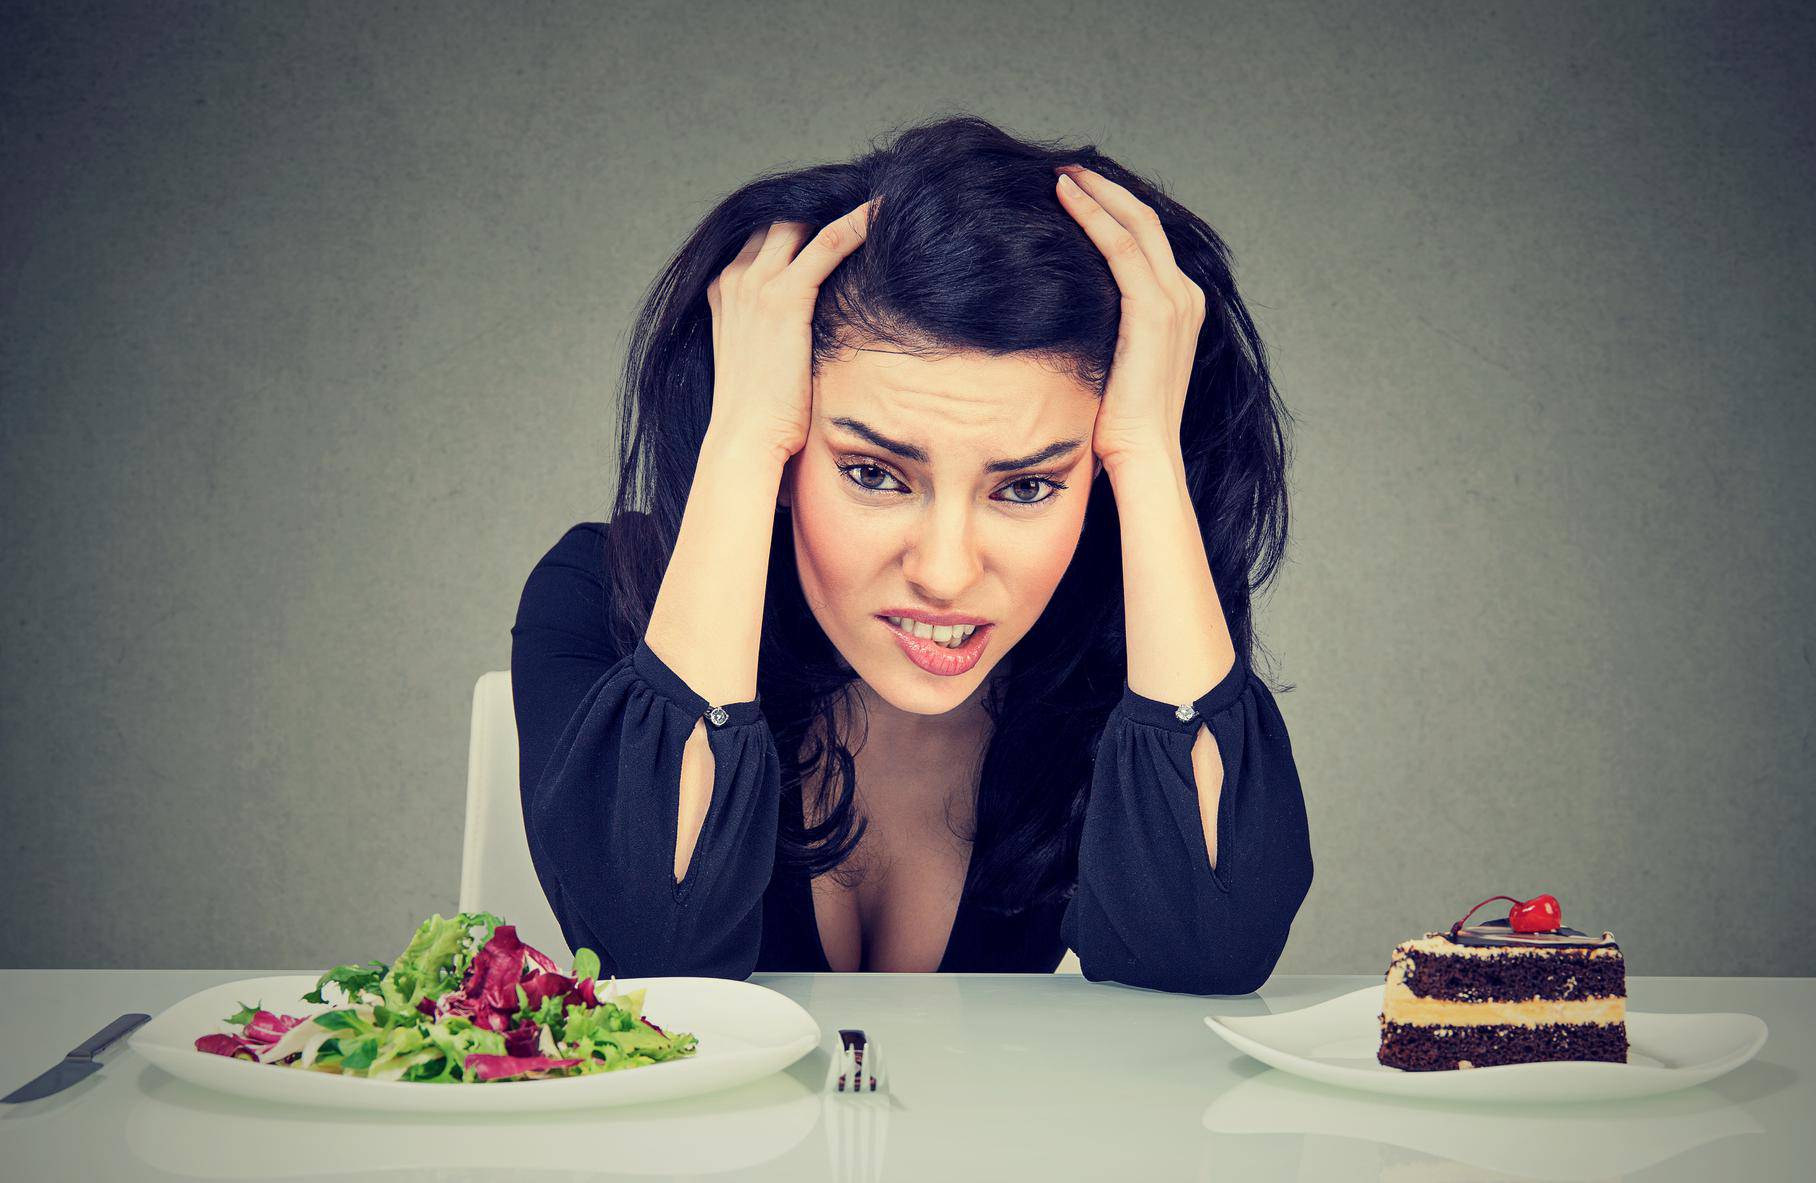 Woman tired of diet restrictions deciding to eat healthy food or cake she is craving